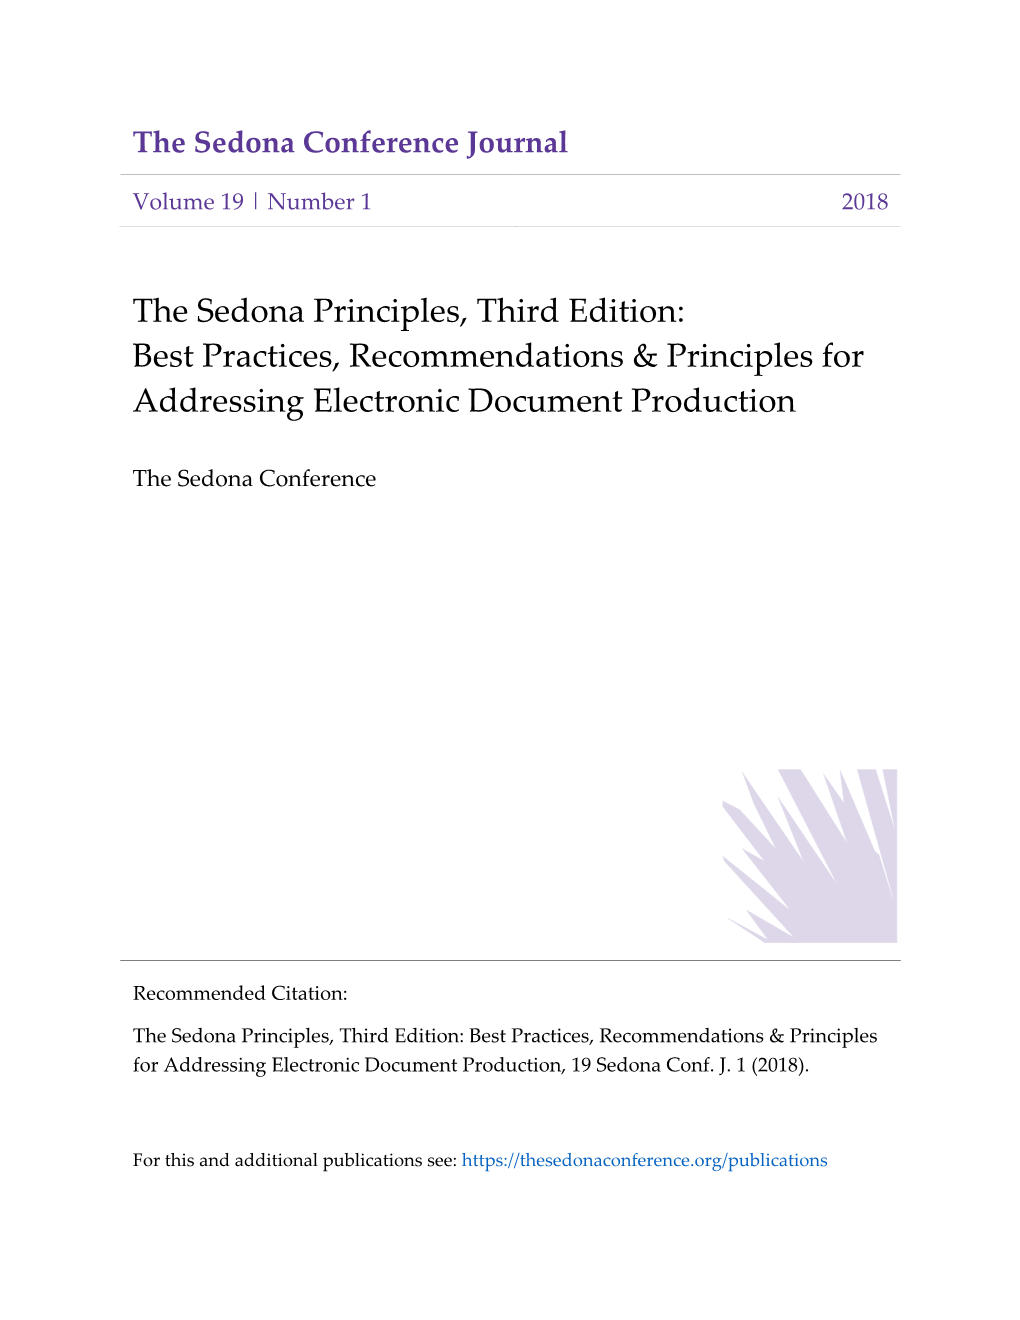 The Sedona Principles, Third Edition: Best Practices, Recommendations & Principles for Addressing Electronic Document Production